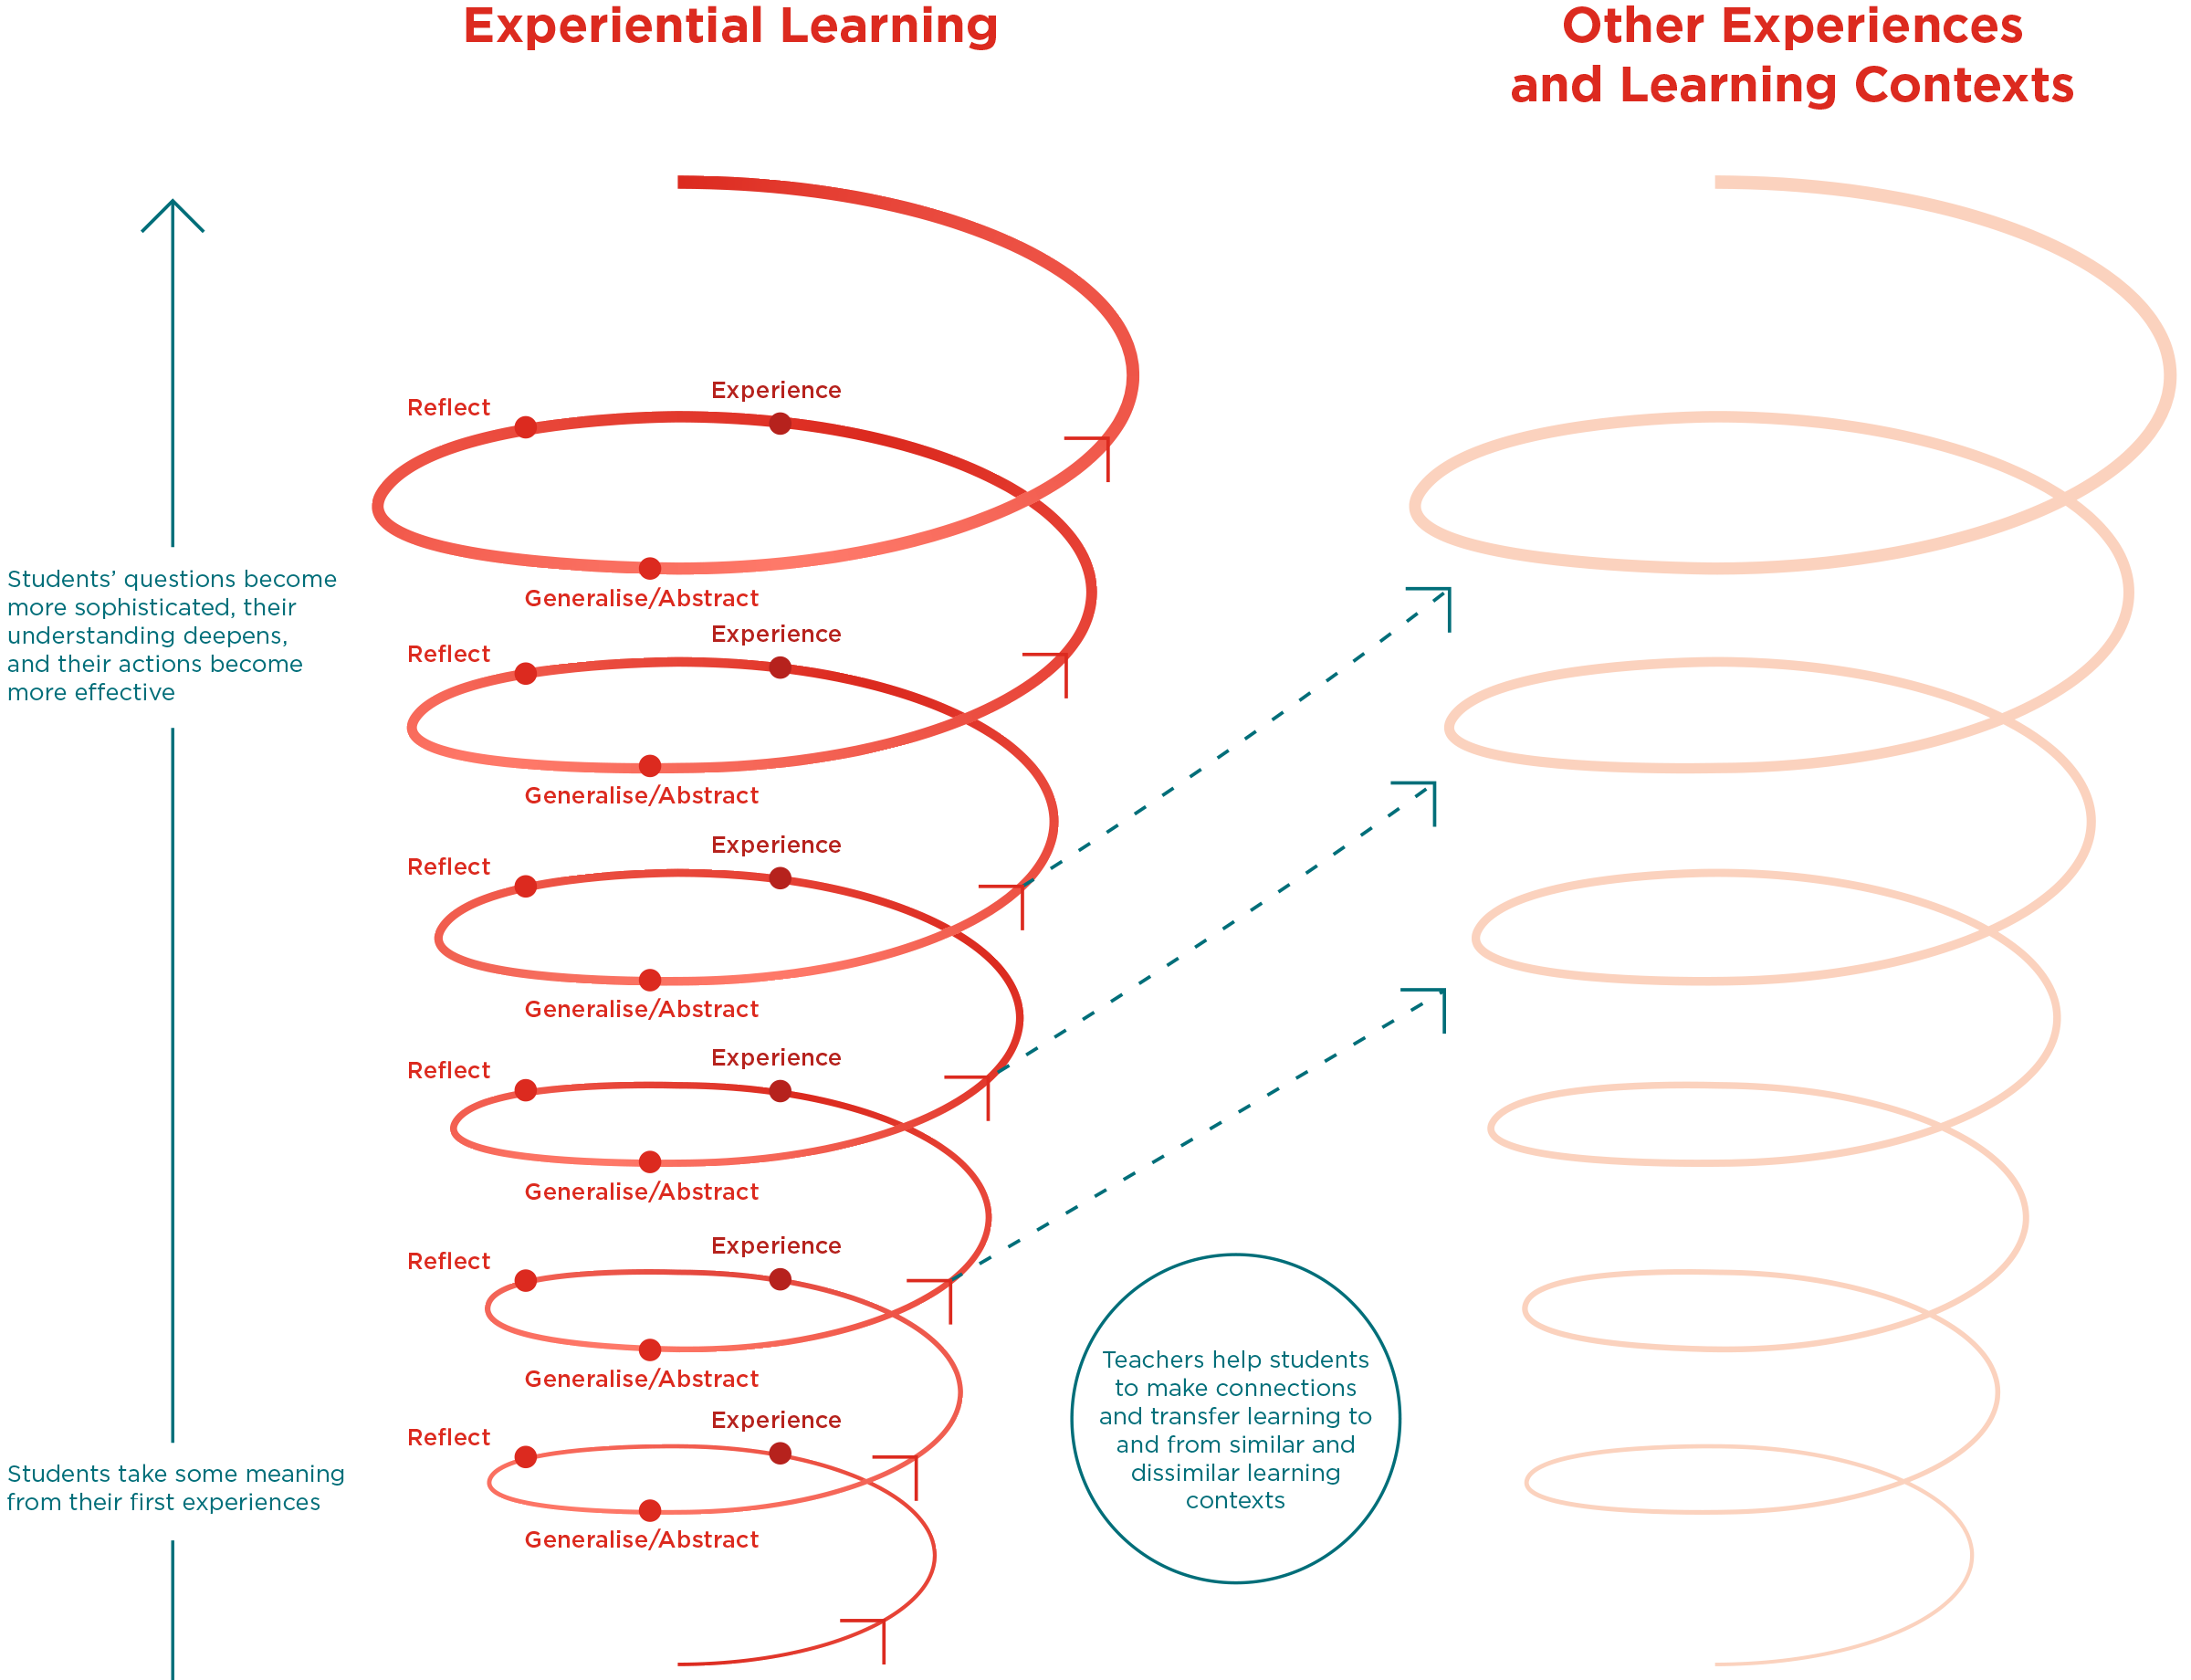 Spiral diagram showing how the Experiential Learning model transfers to other learning areas